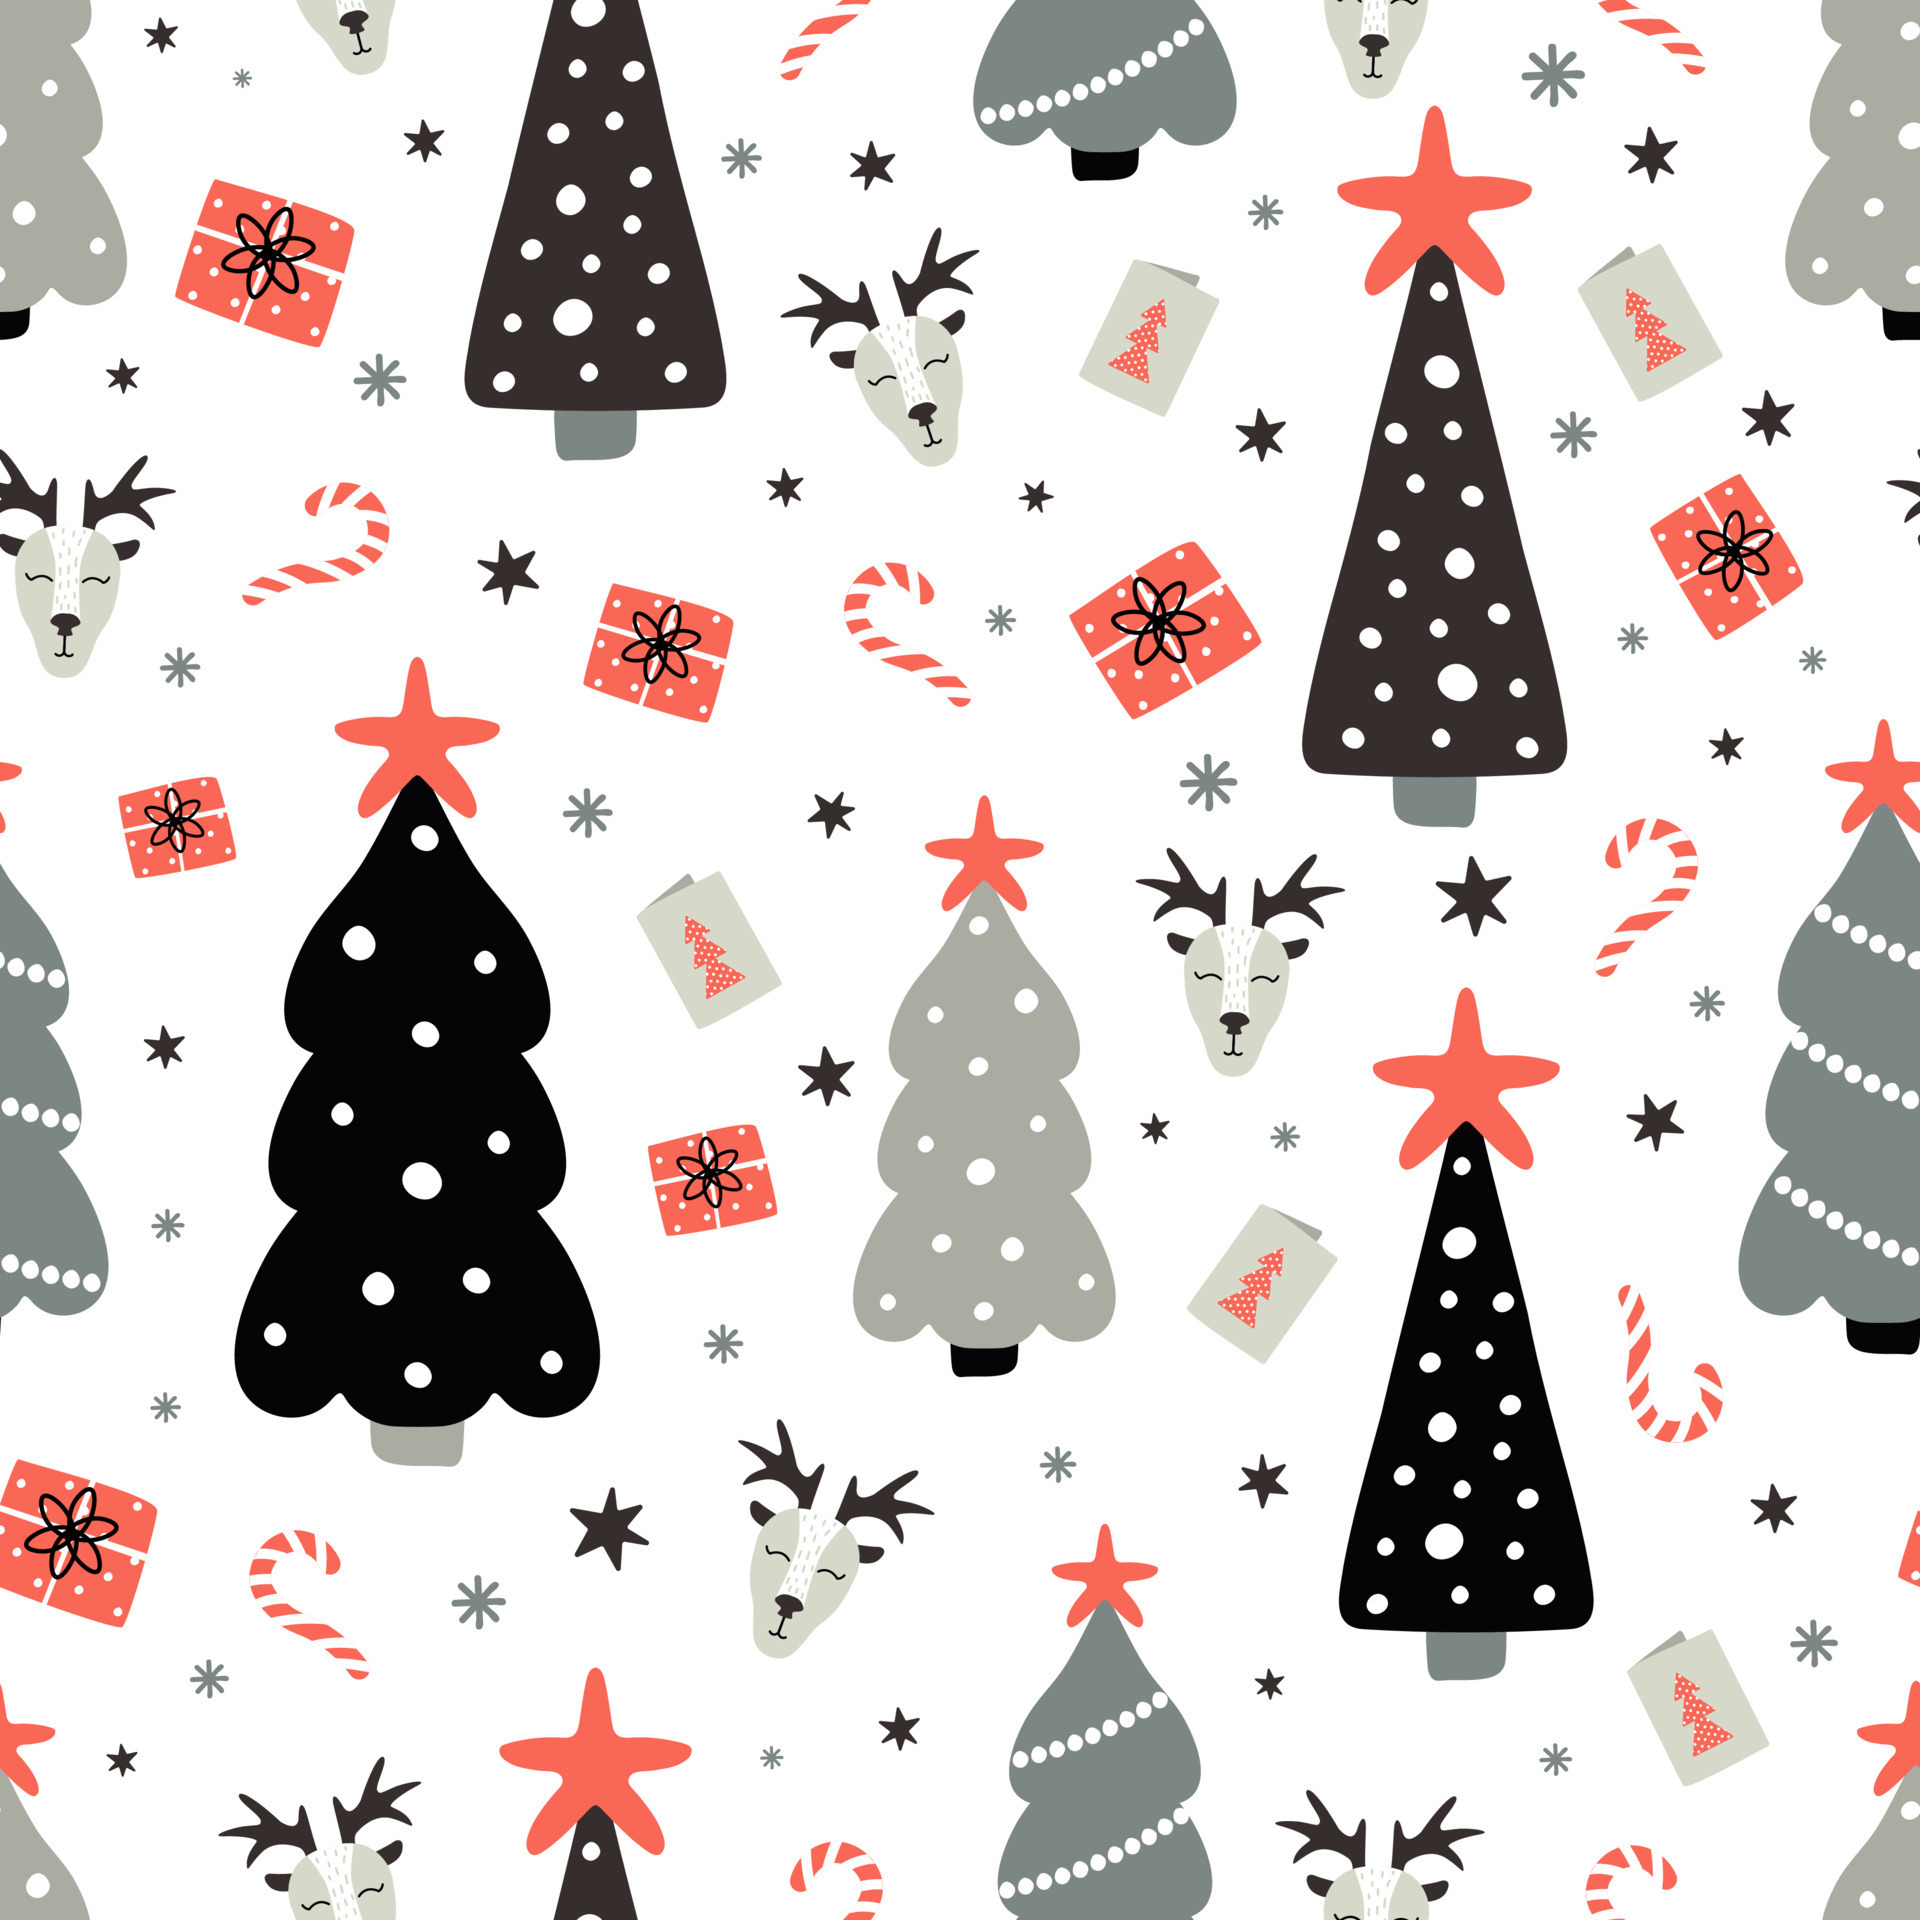 Christmas seamless pattern with spruce trees and snowflake dots on white background. Background for wallpaper, textiles, papers, gift boxes, fabrics, web pages. Vintage style